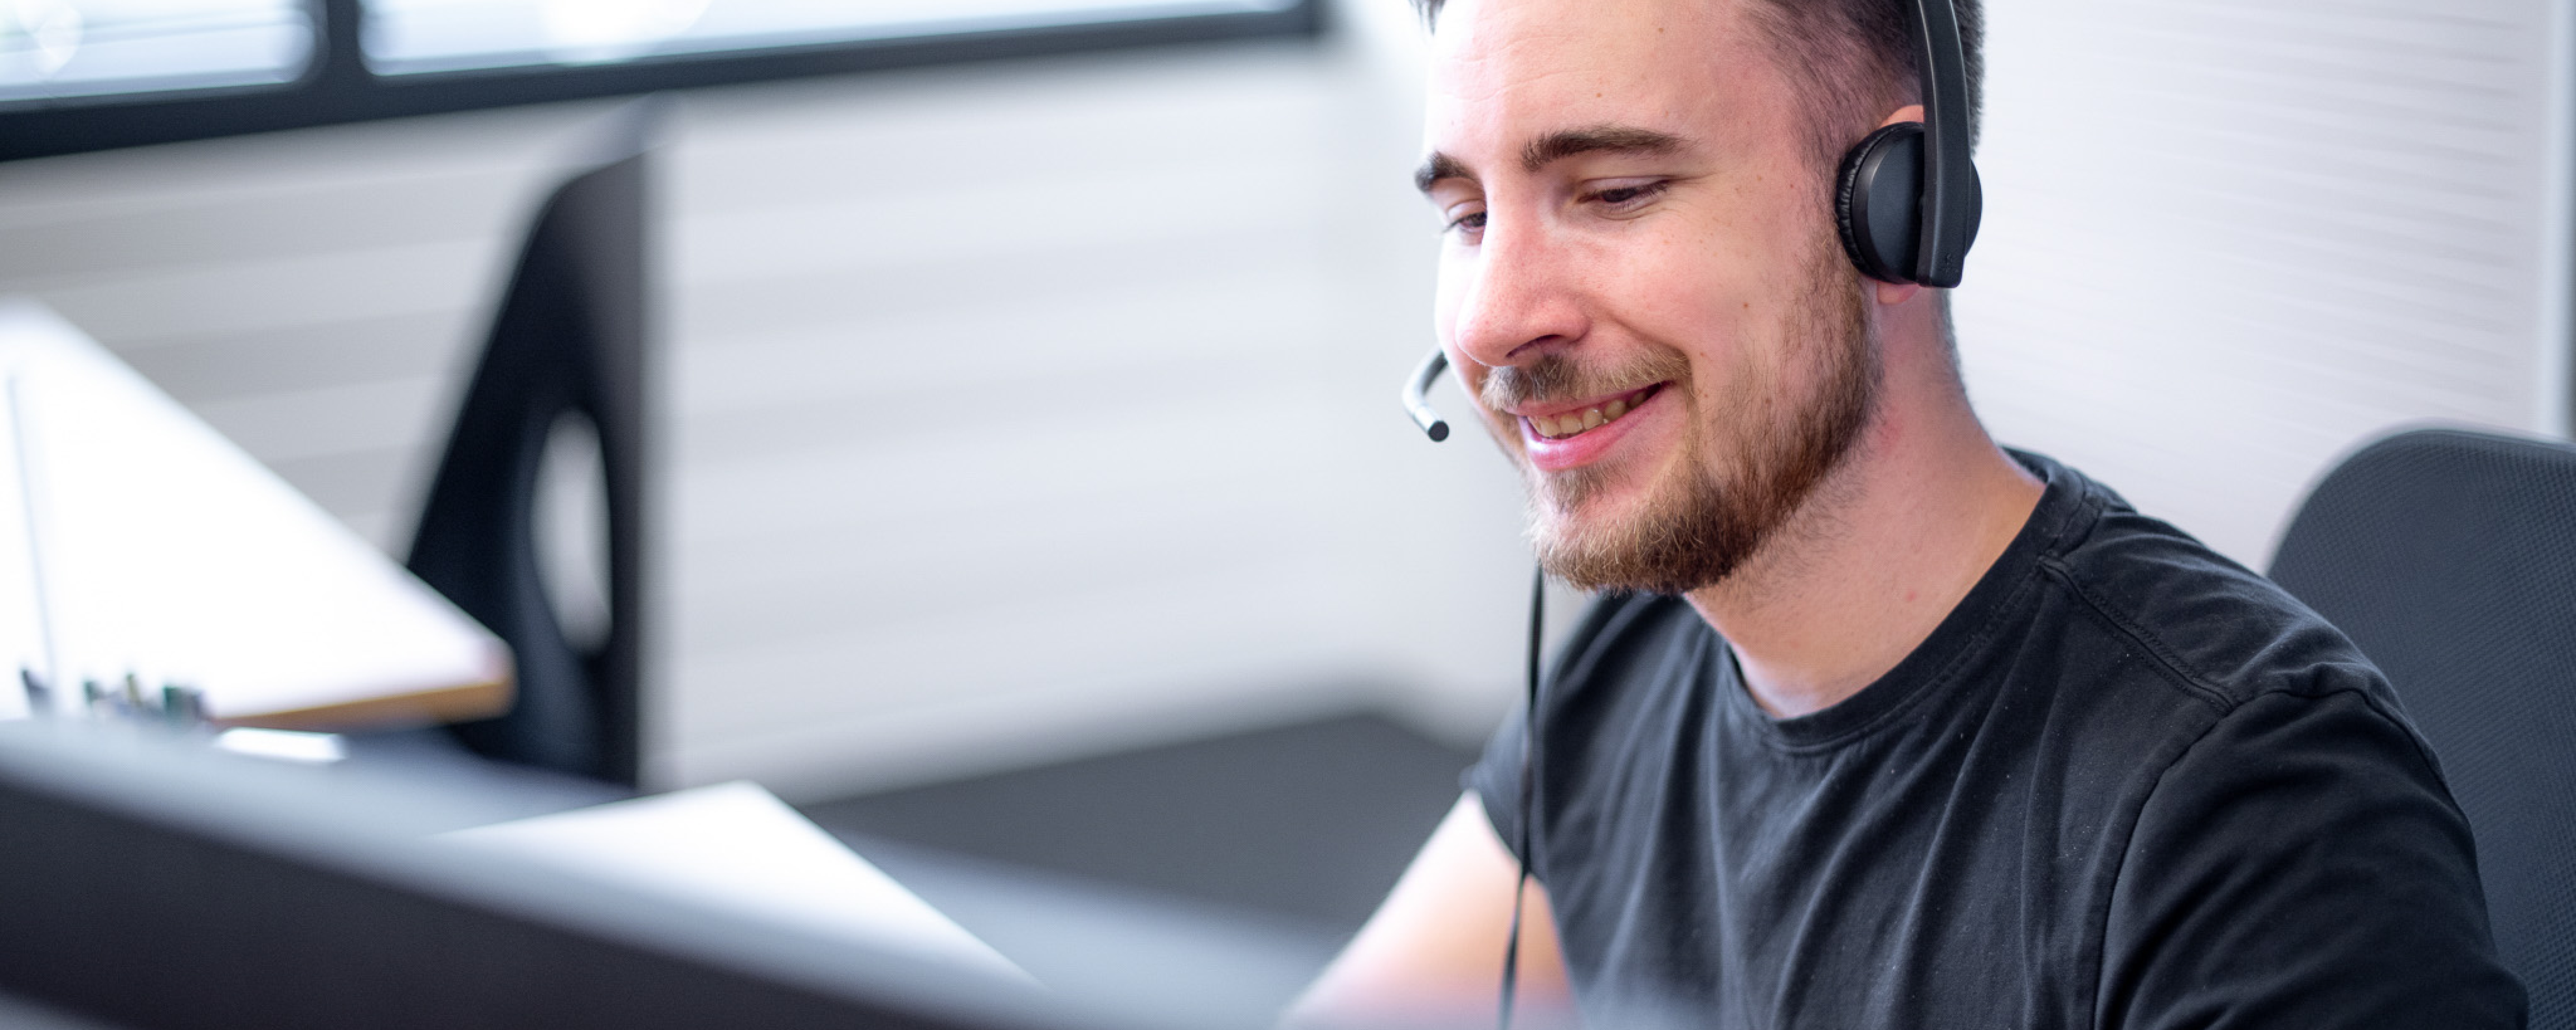 Employee smiling with headset on in front of computer